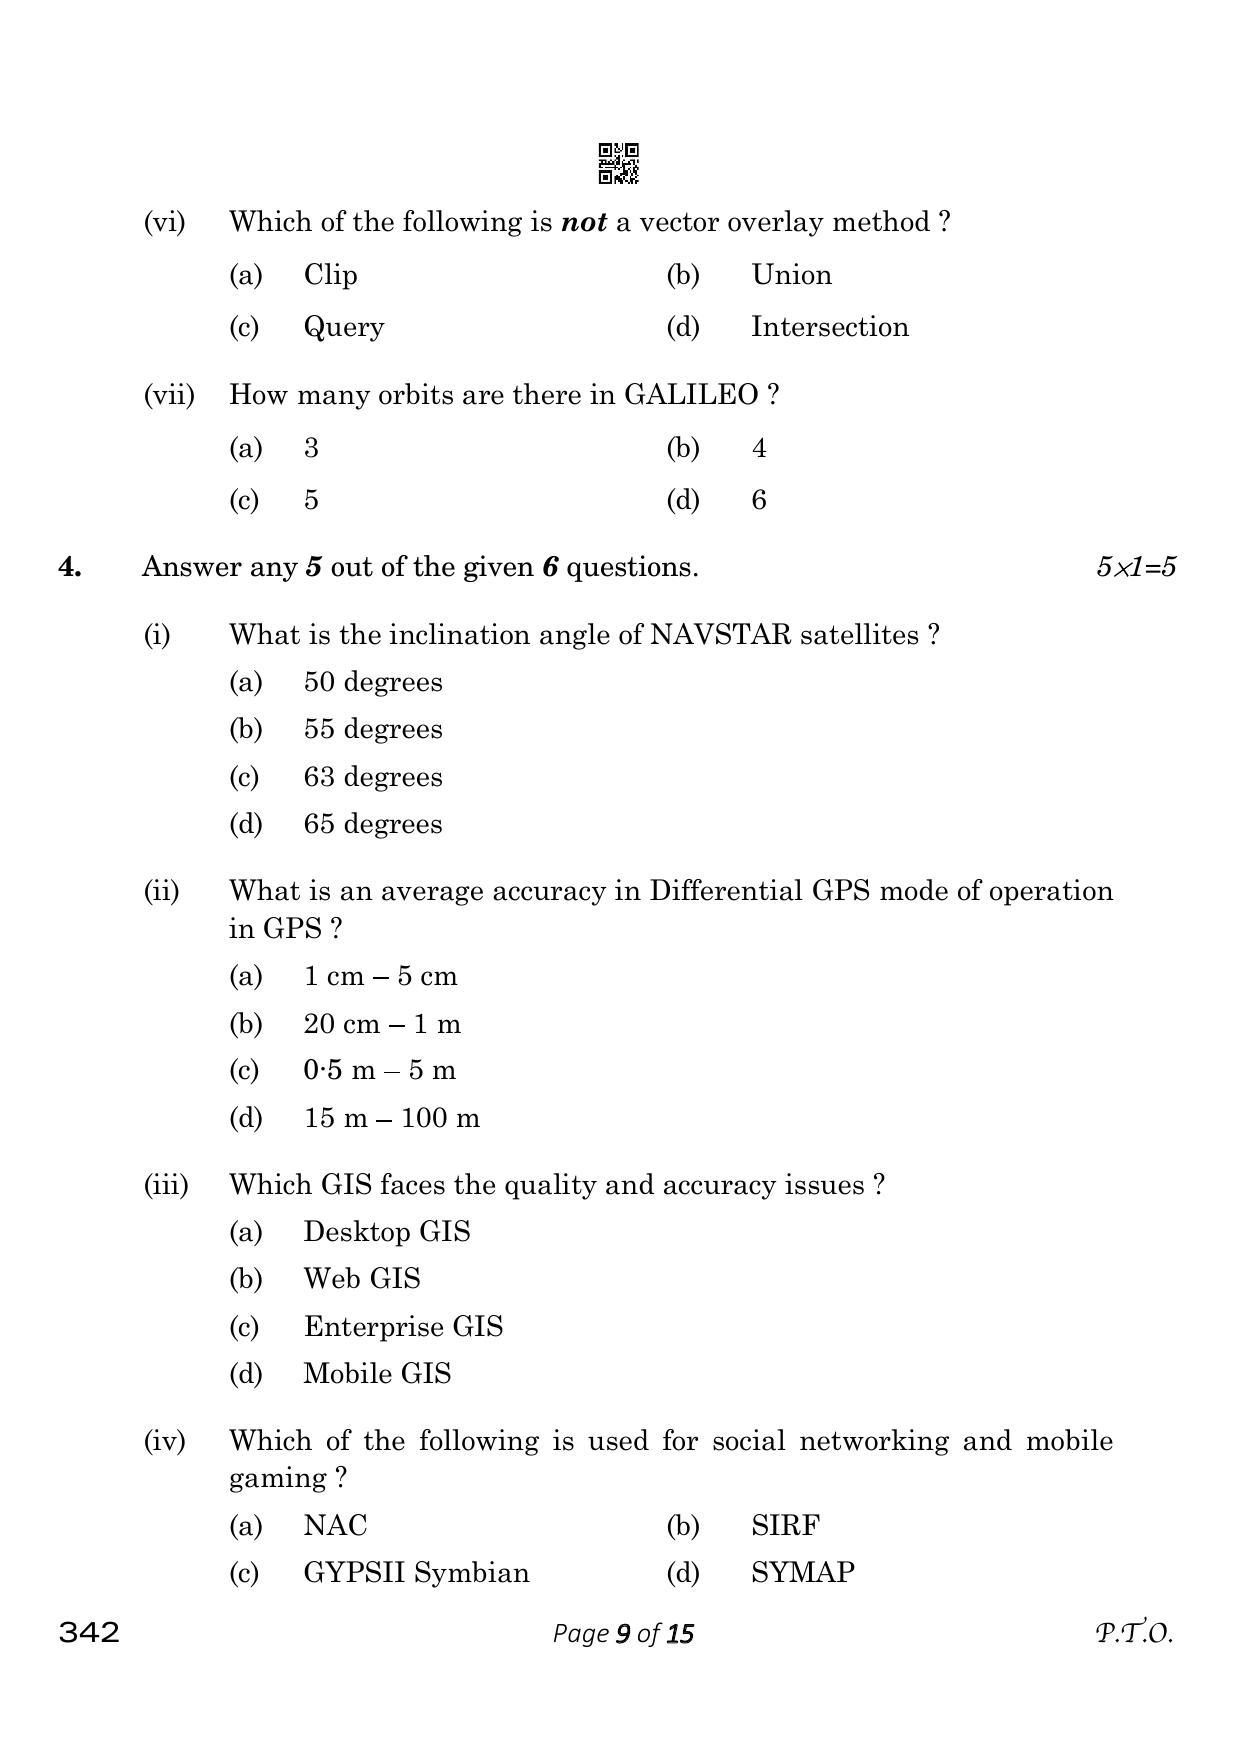 CBSE Class 12 342_Geospatial Technology 2023 Question Paper - Page 9